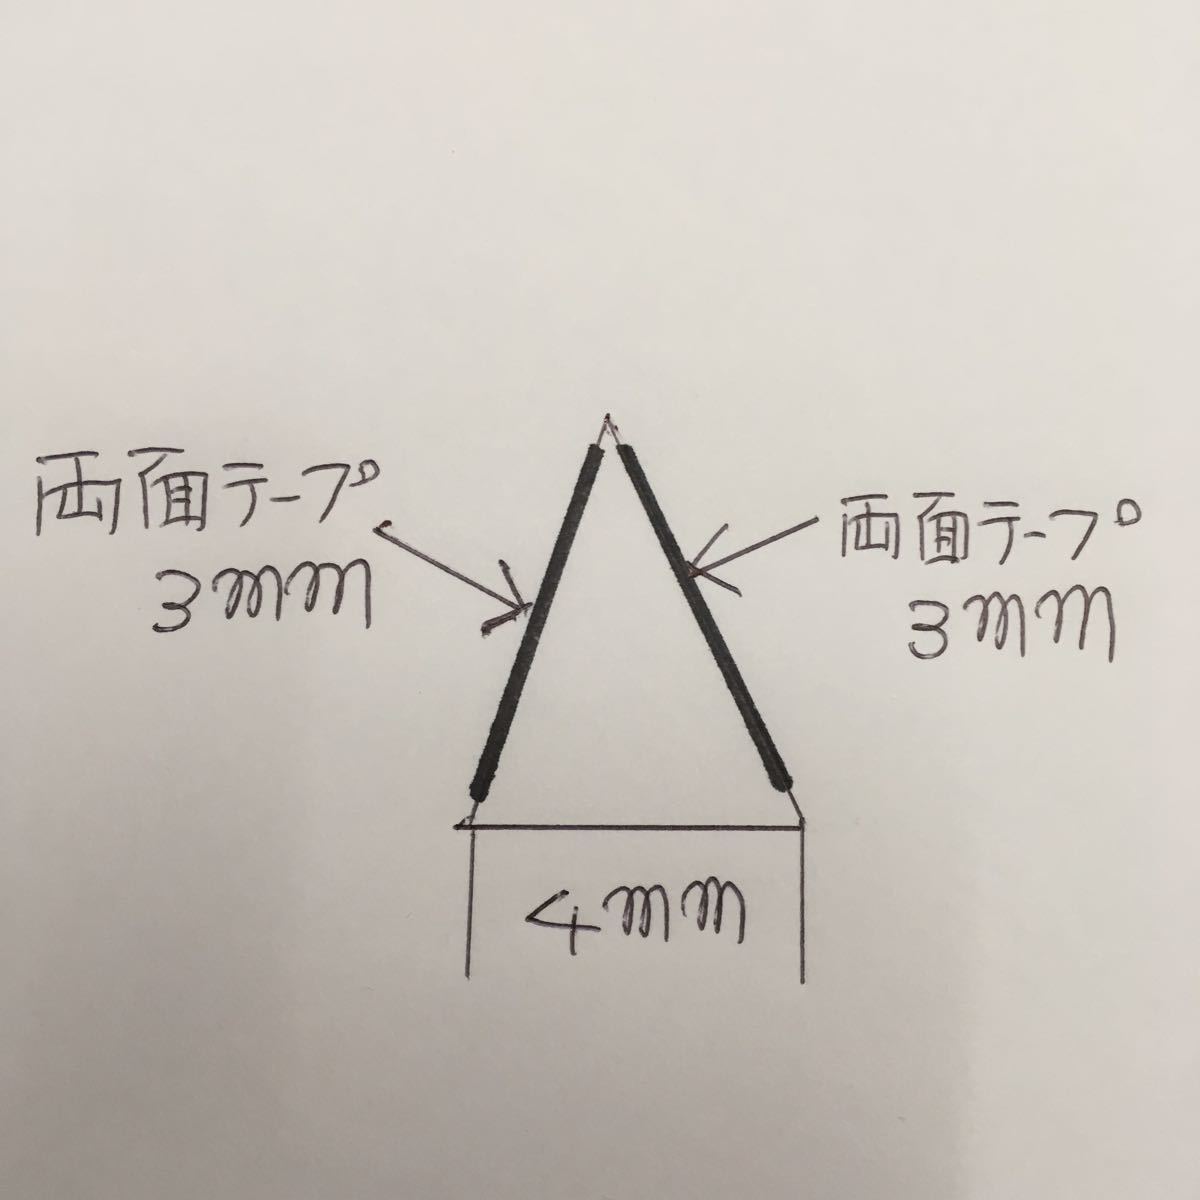  triangle shape molding * color black 4M 1 genuine article *3M both sides tape attaching unused goods * car window . body. crevice etc. 